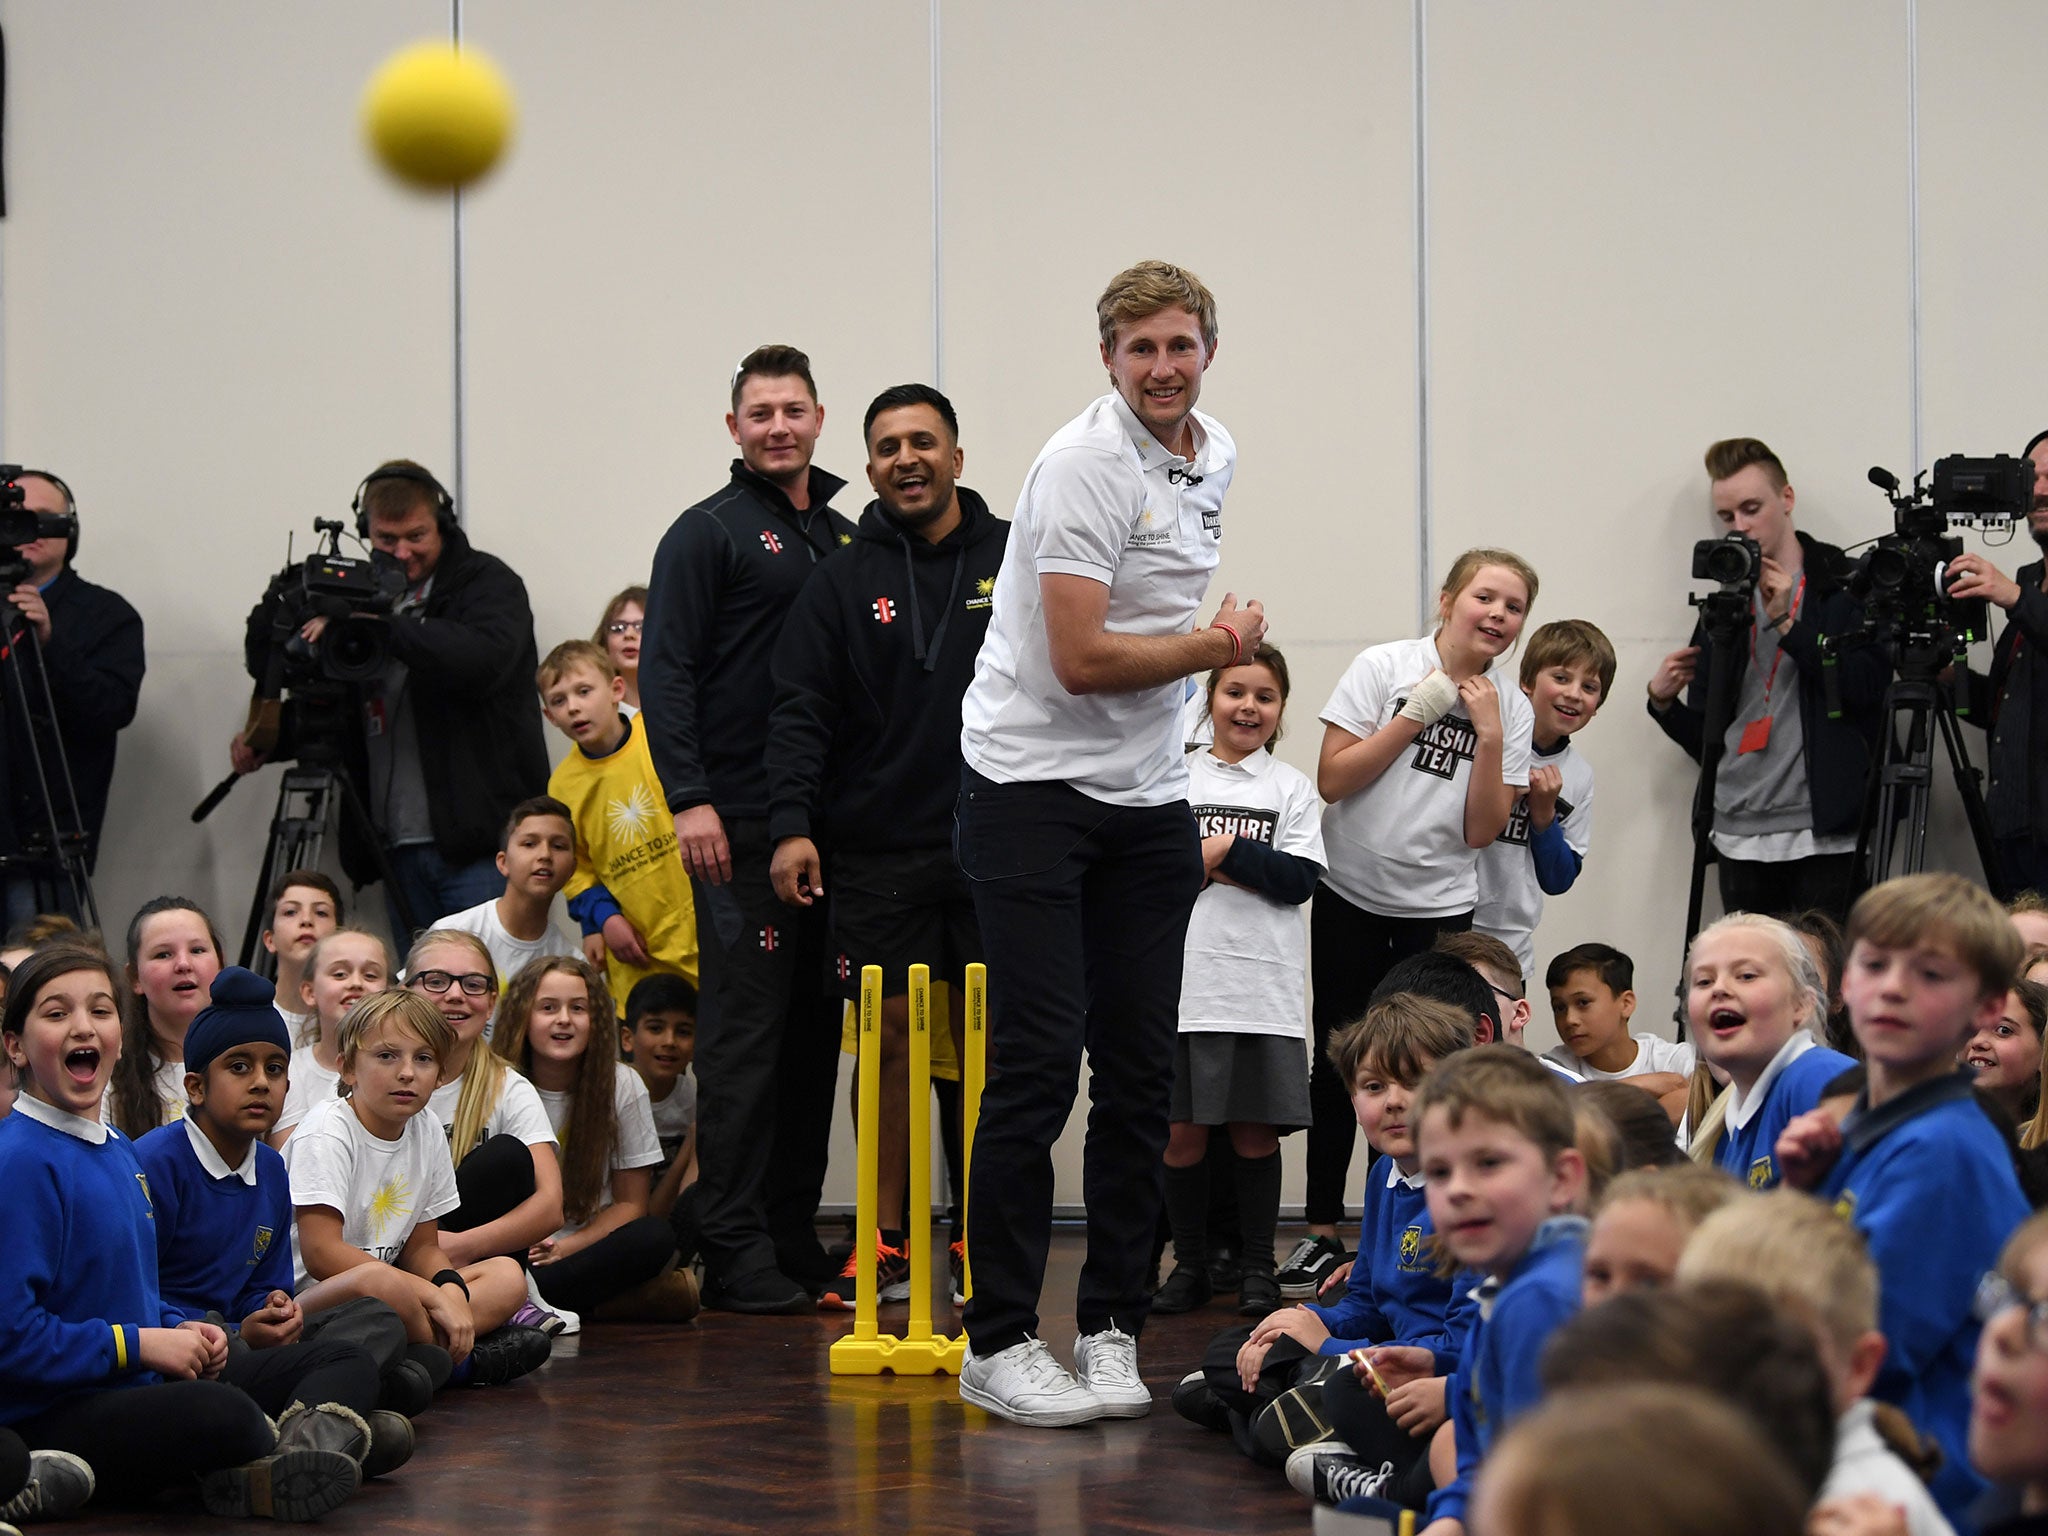 Root treats the children of his old primary school to some of his bowling